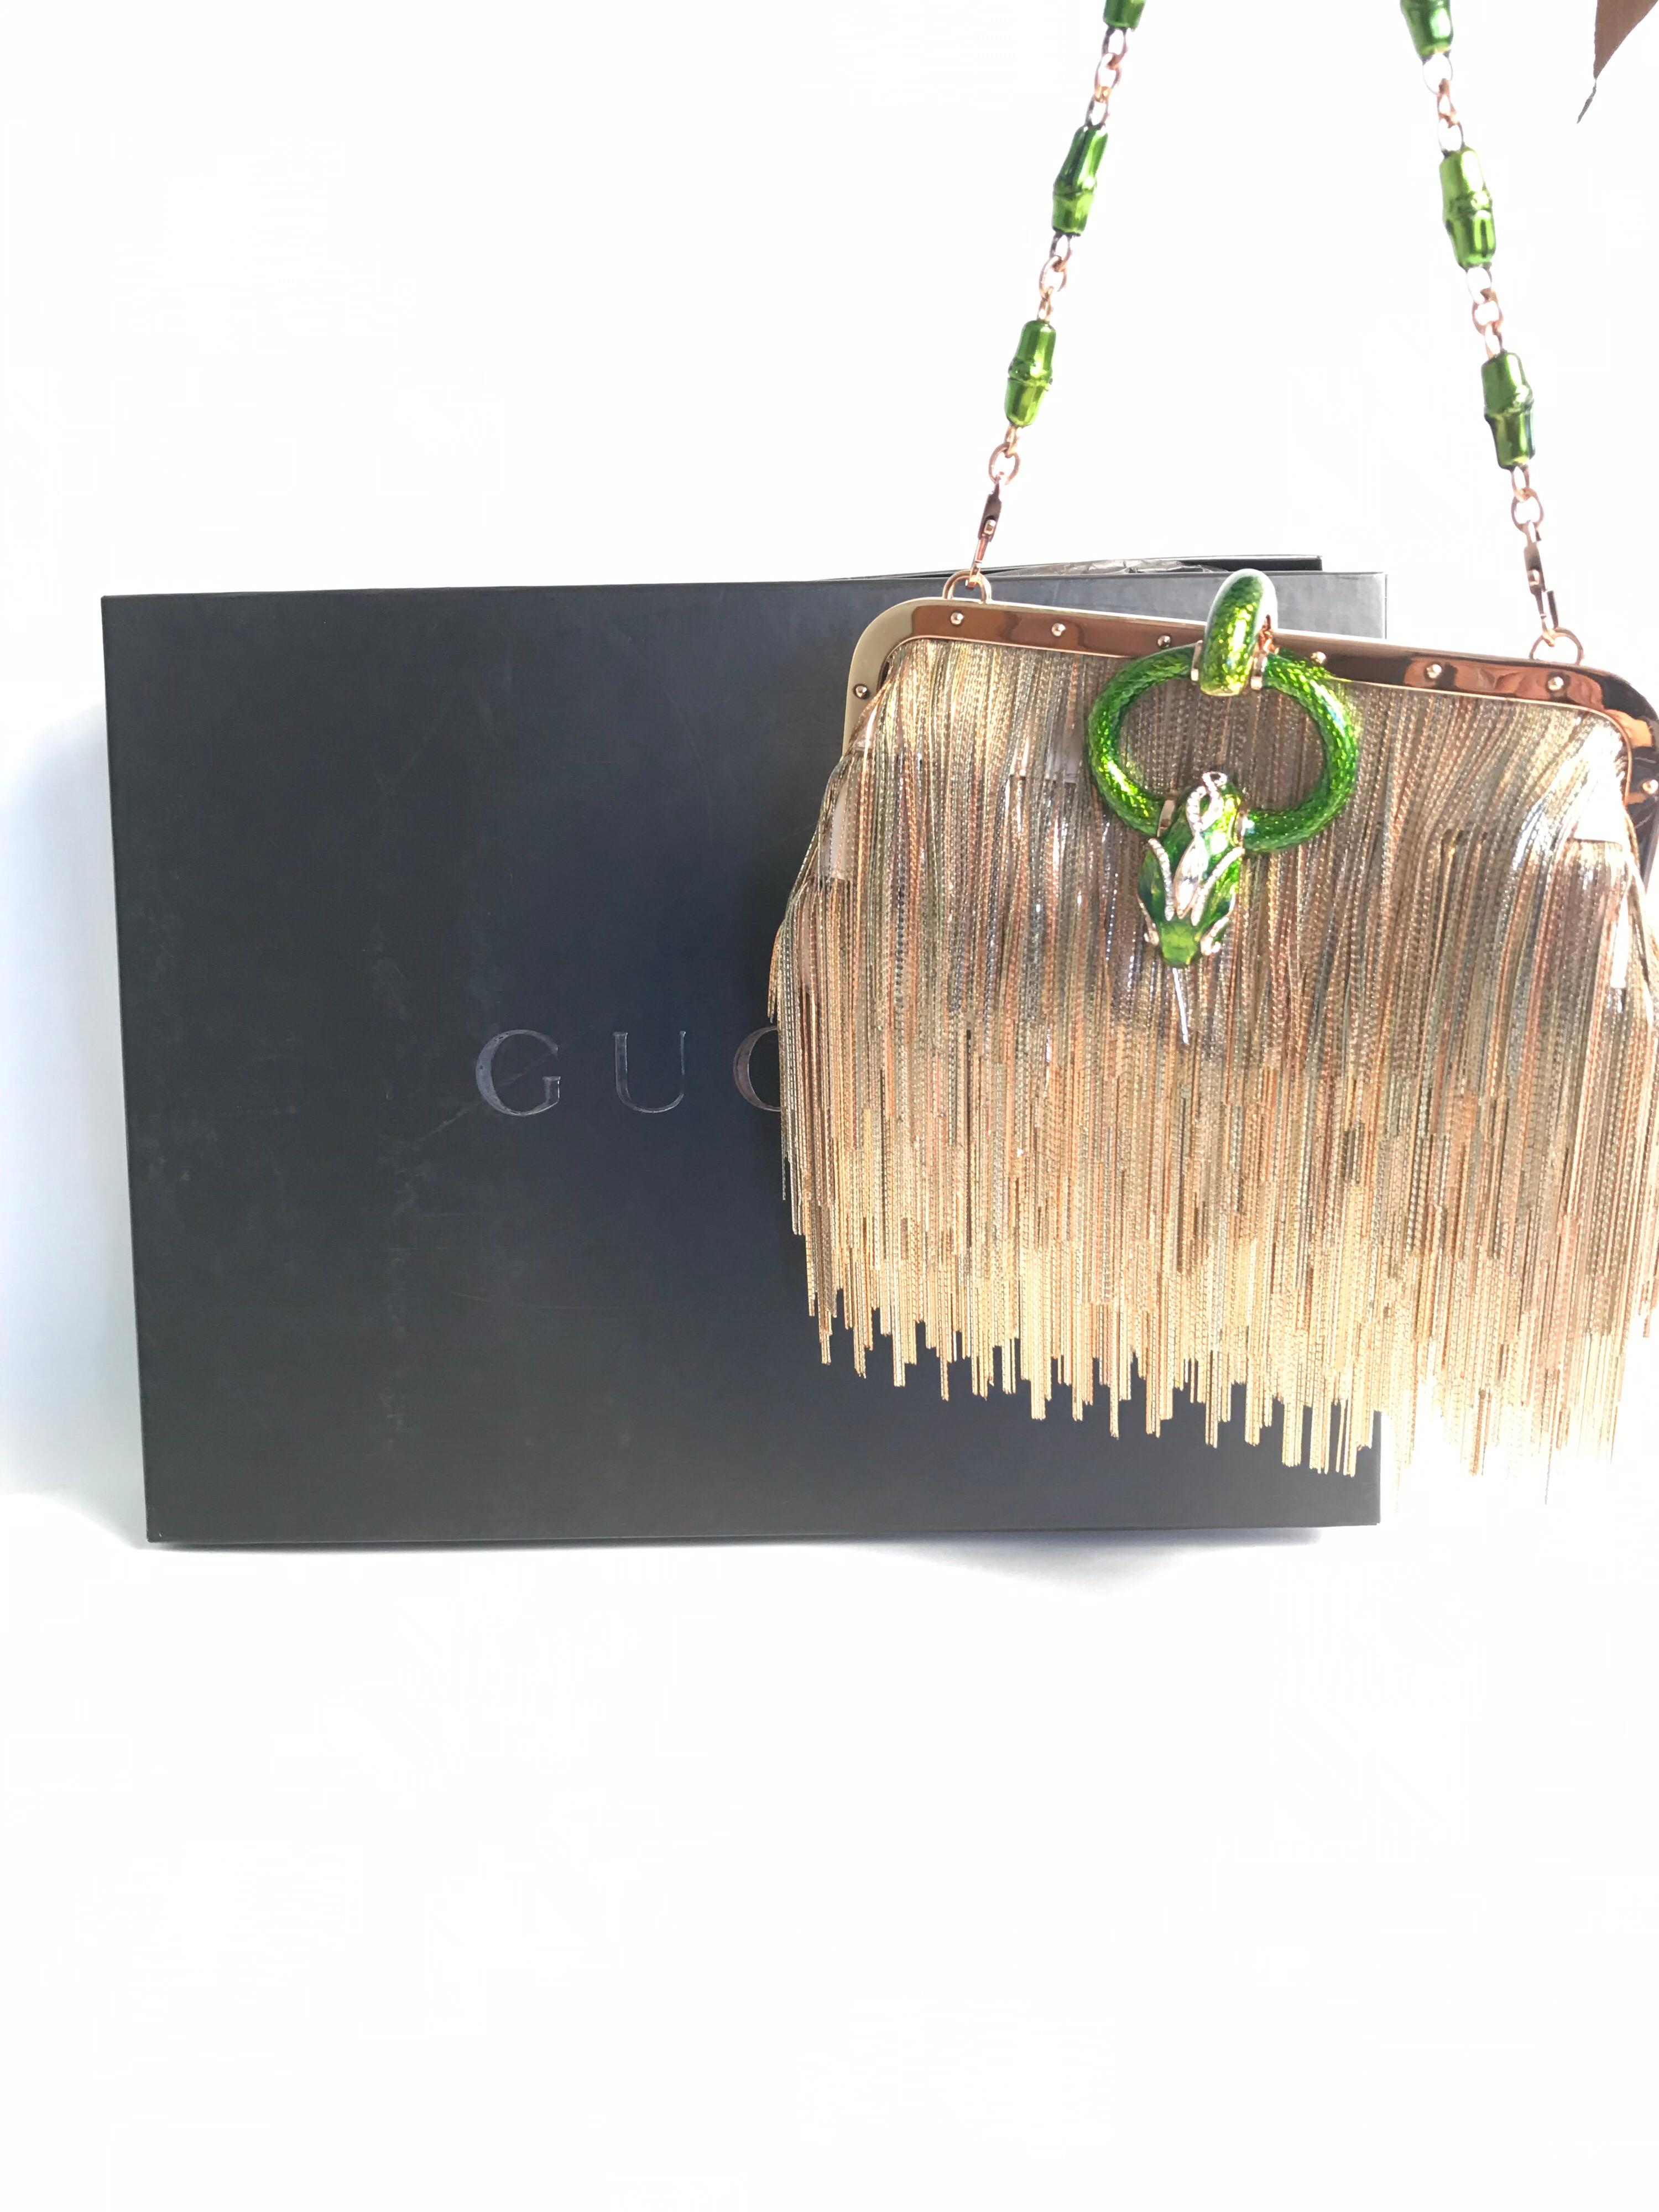 Women's Gucci by Tom Ford Dragon Metal Fringe Bag, Limited Edition